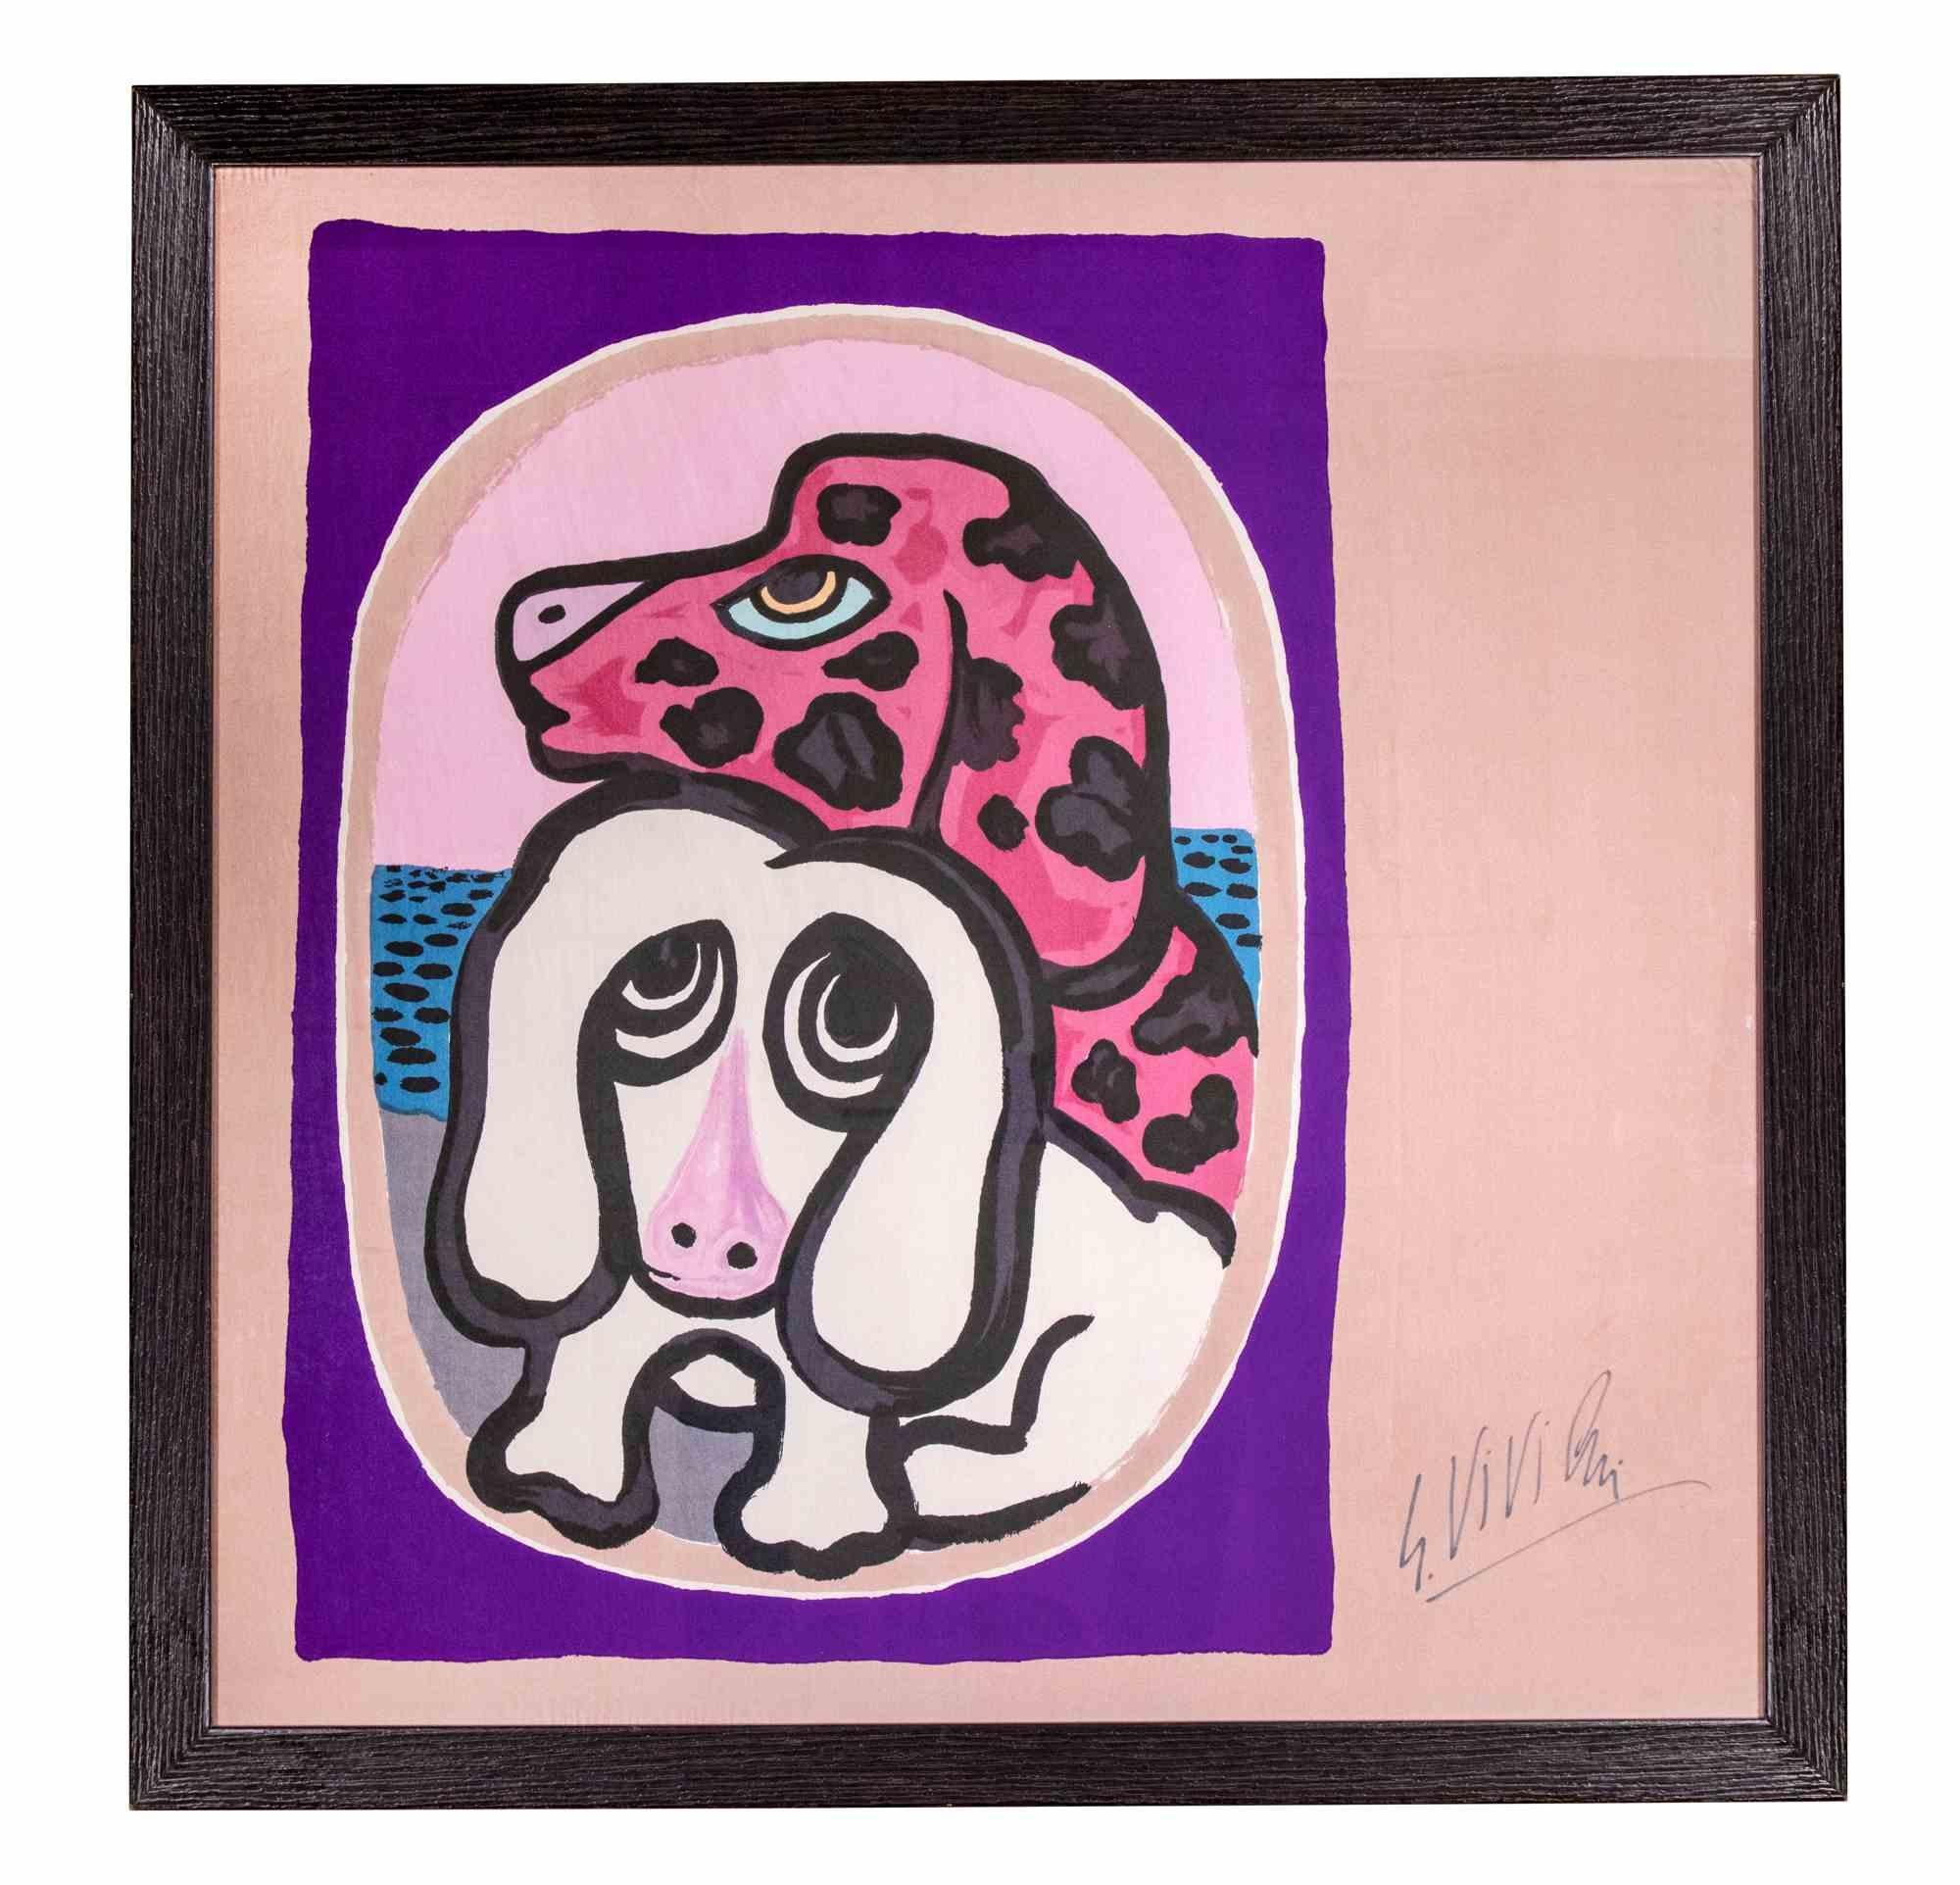 Dogs is a artwrok realized by Giuseppe Viviani in 1964.

The artwork consist in an original screen print on silk.

Hand signed signed by the Artist.

Edition of 300, of which only a few were signed by Viviani.

Published on the Viviani's Catalogue